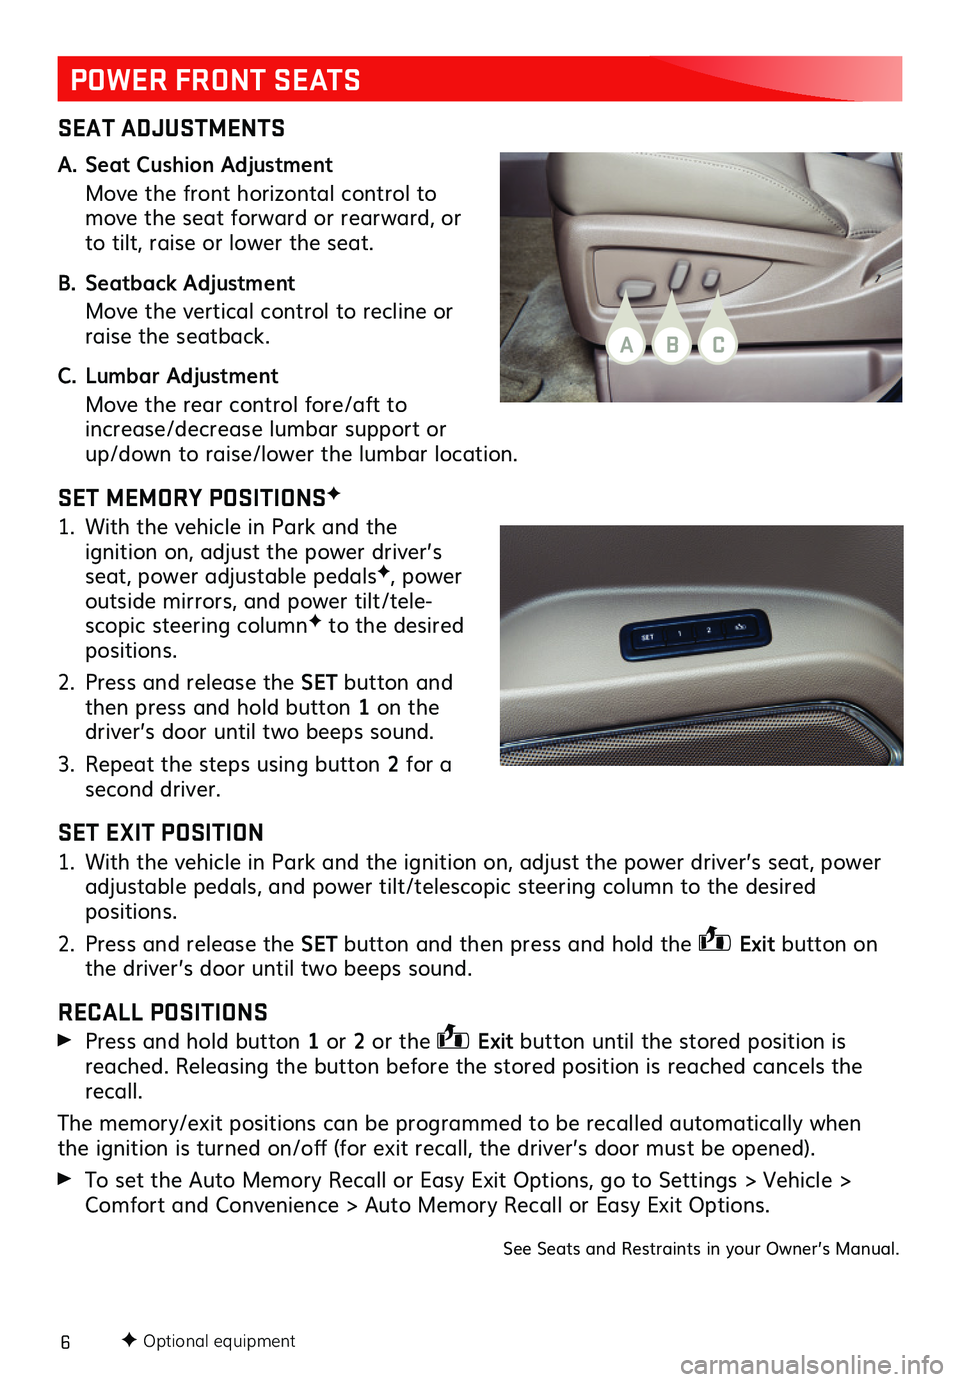 GMC YUKON 2020  Get To Know Guide 6
POWER FRONT SEATS
SEAT ADJUSTMENTS
A. Seat Cushion Adjustment
 Move the front horizontal control to move the seat forward or rearward, or to tilt, raise or lower the seat.
B. Seatback Adjustment
 Mo